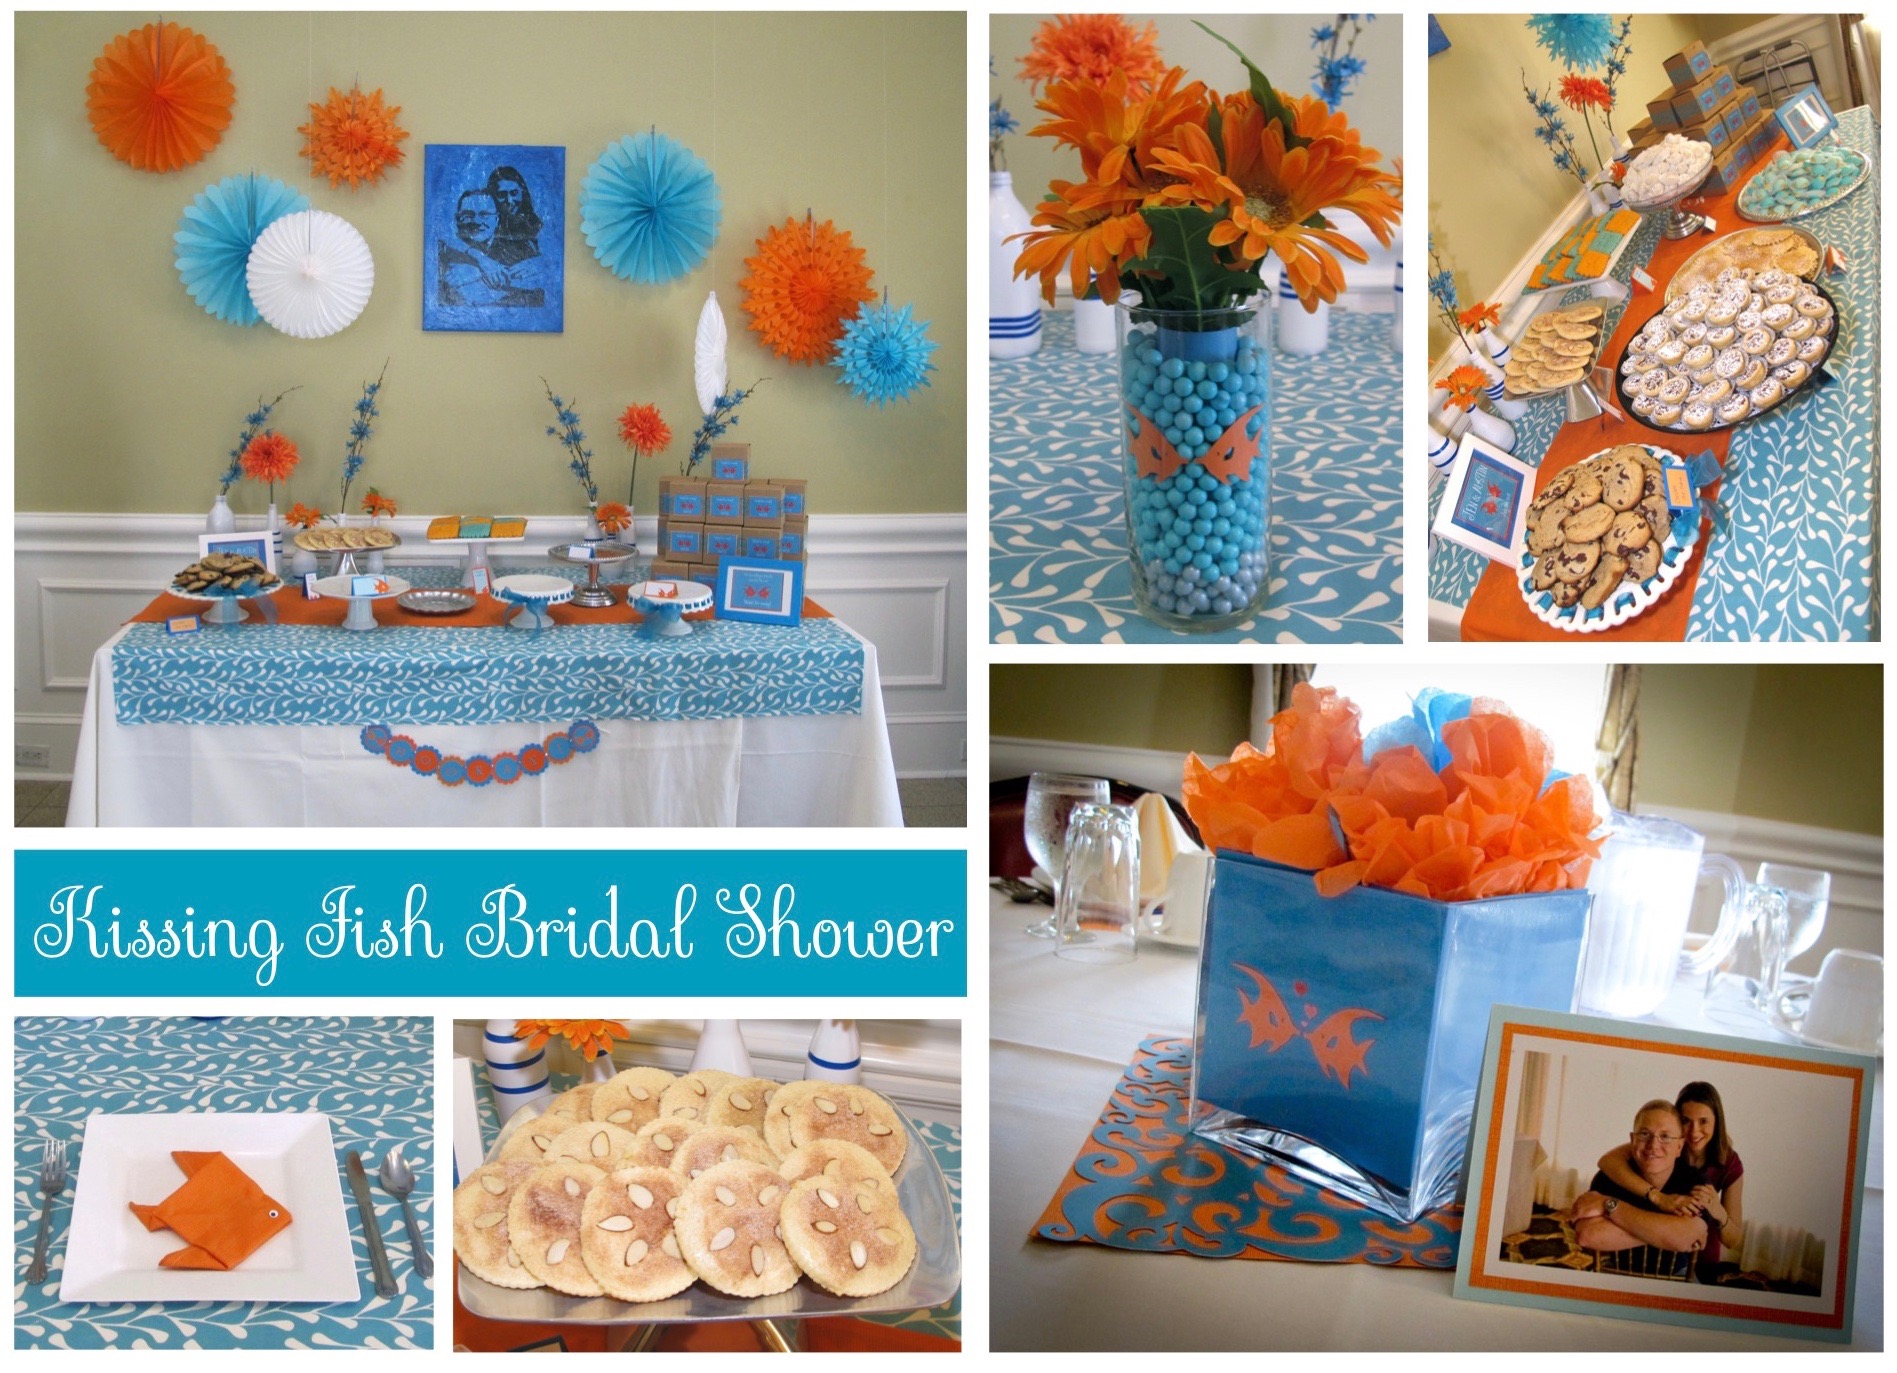 Kissing Fish Bridal Shower Ideas with orange and blue decorations and  cookie favor table